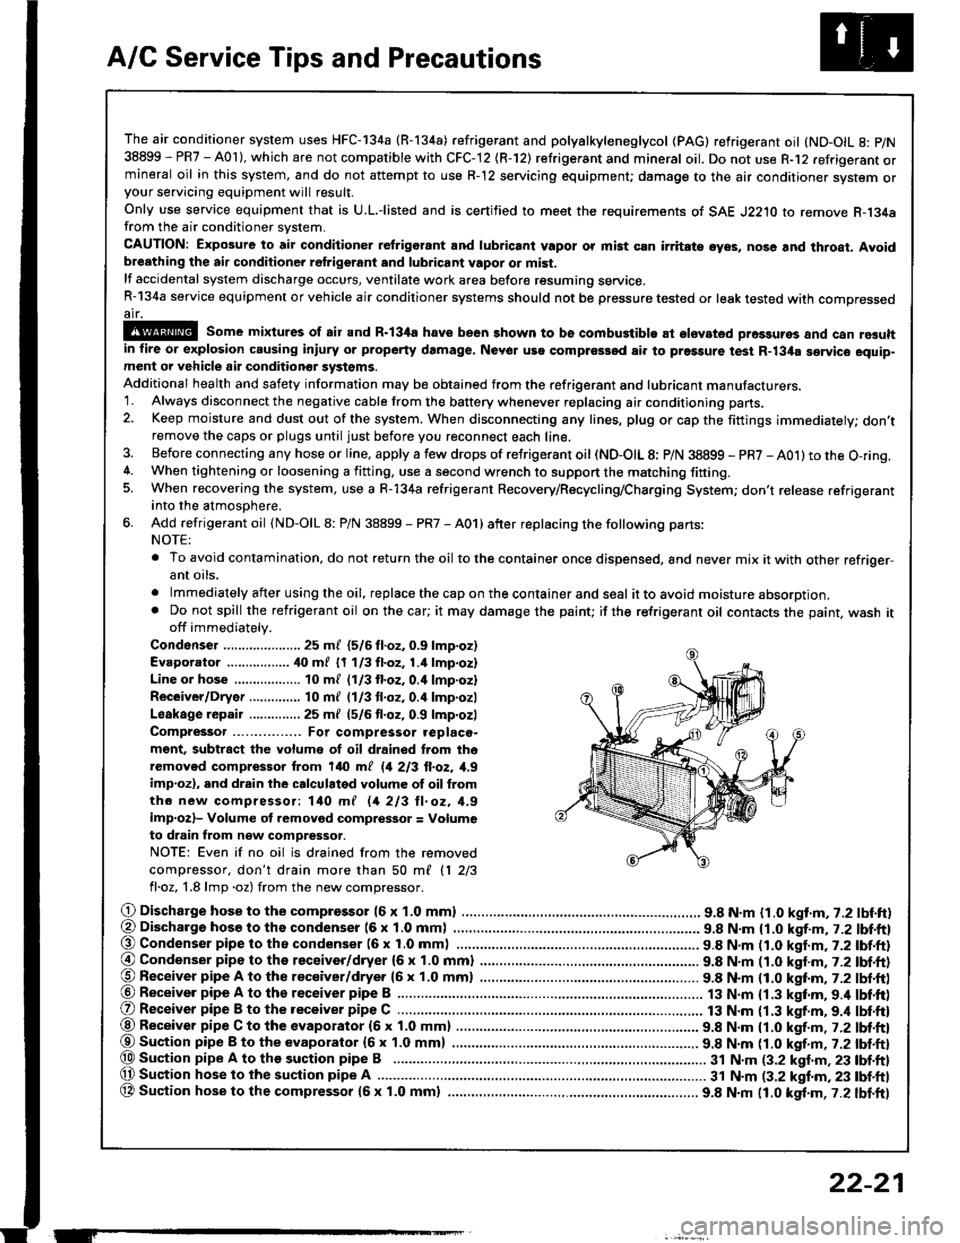 HONDA INTEGRA 1994 4.G Service Manual A/C Service Tips and Precautions
The air conditioner system uses HFC-134a (R-134a) .efrigerant and polyalkyleneglycol (PAG) retrigerant oil (ND-OIL g: p/N
38899 - PR7 - A0l ), which are not compatible